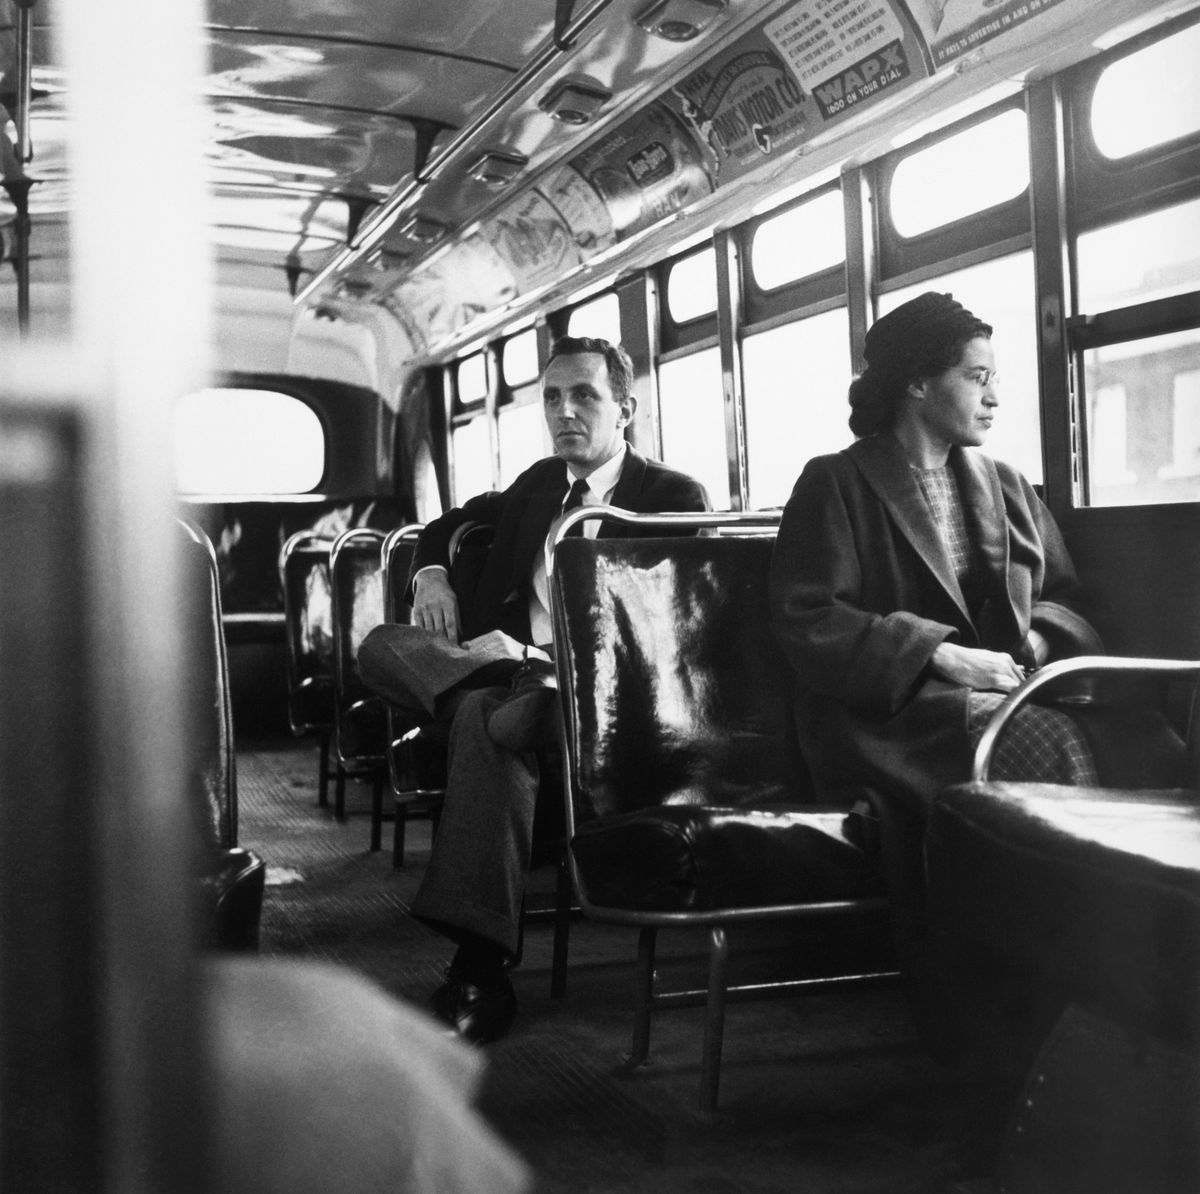 Rosa Parks’ Life After the Montgomery Bus Boycott